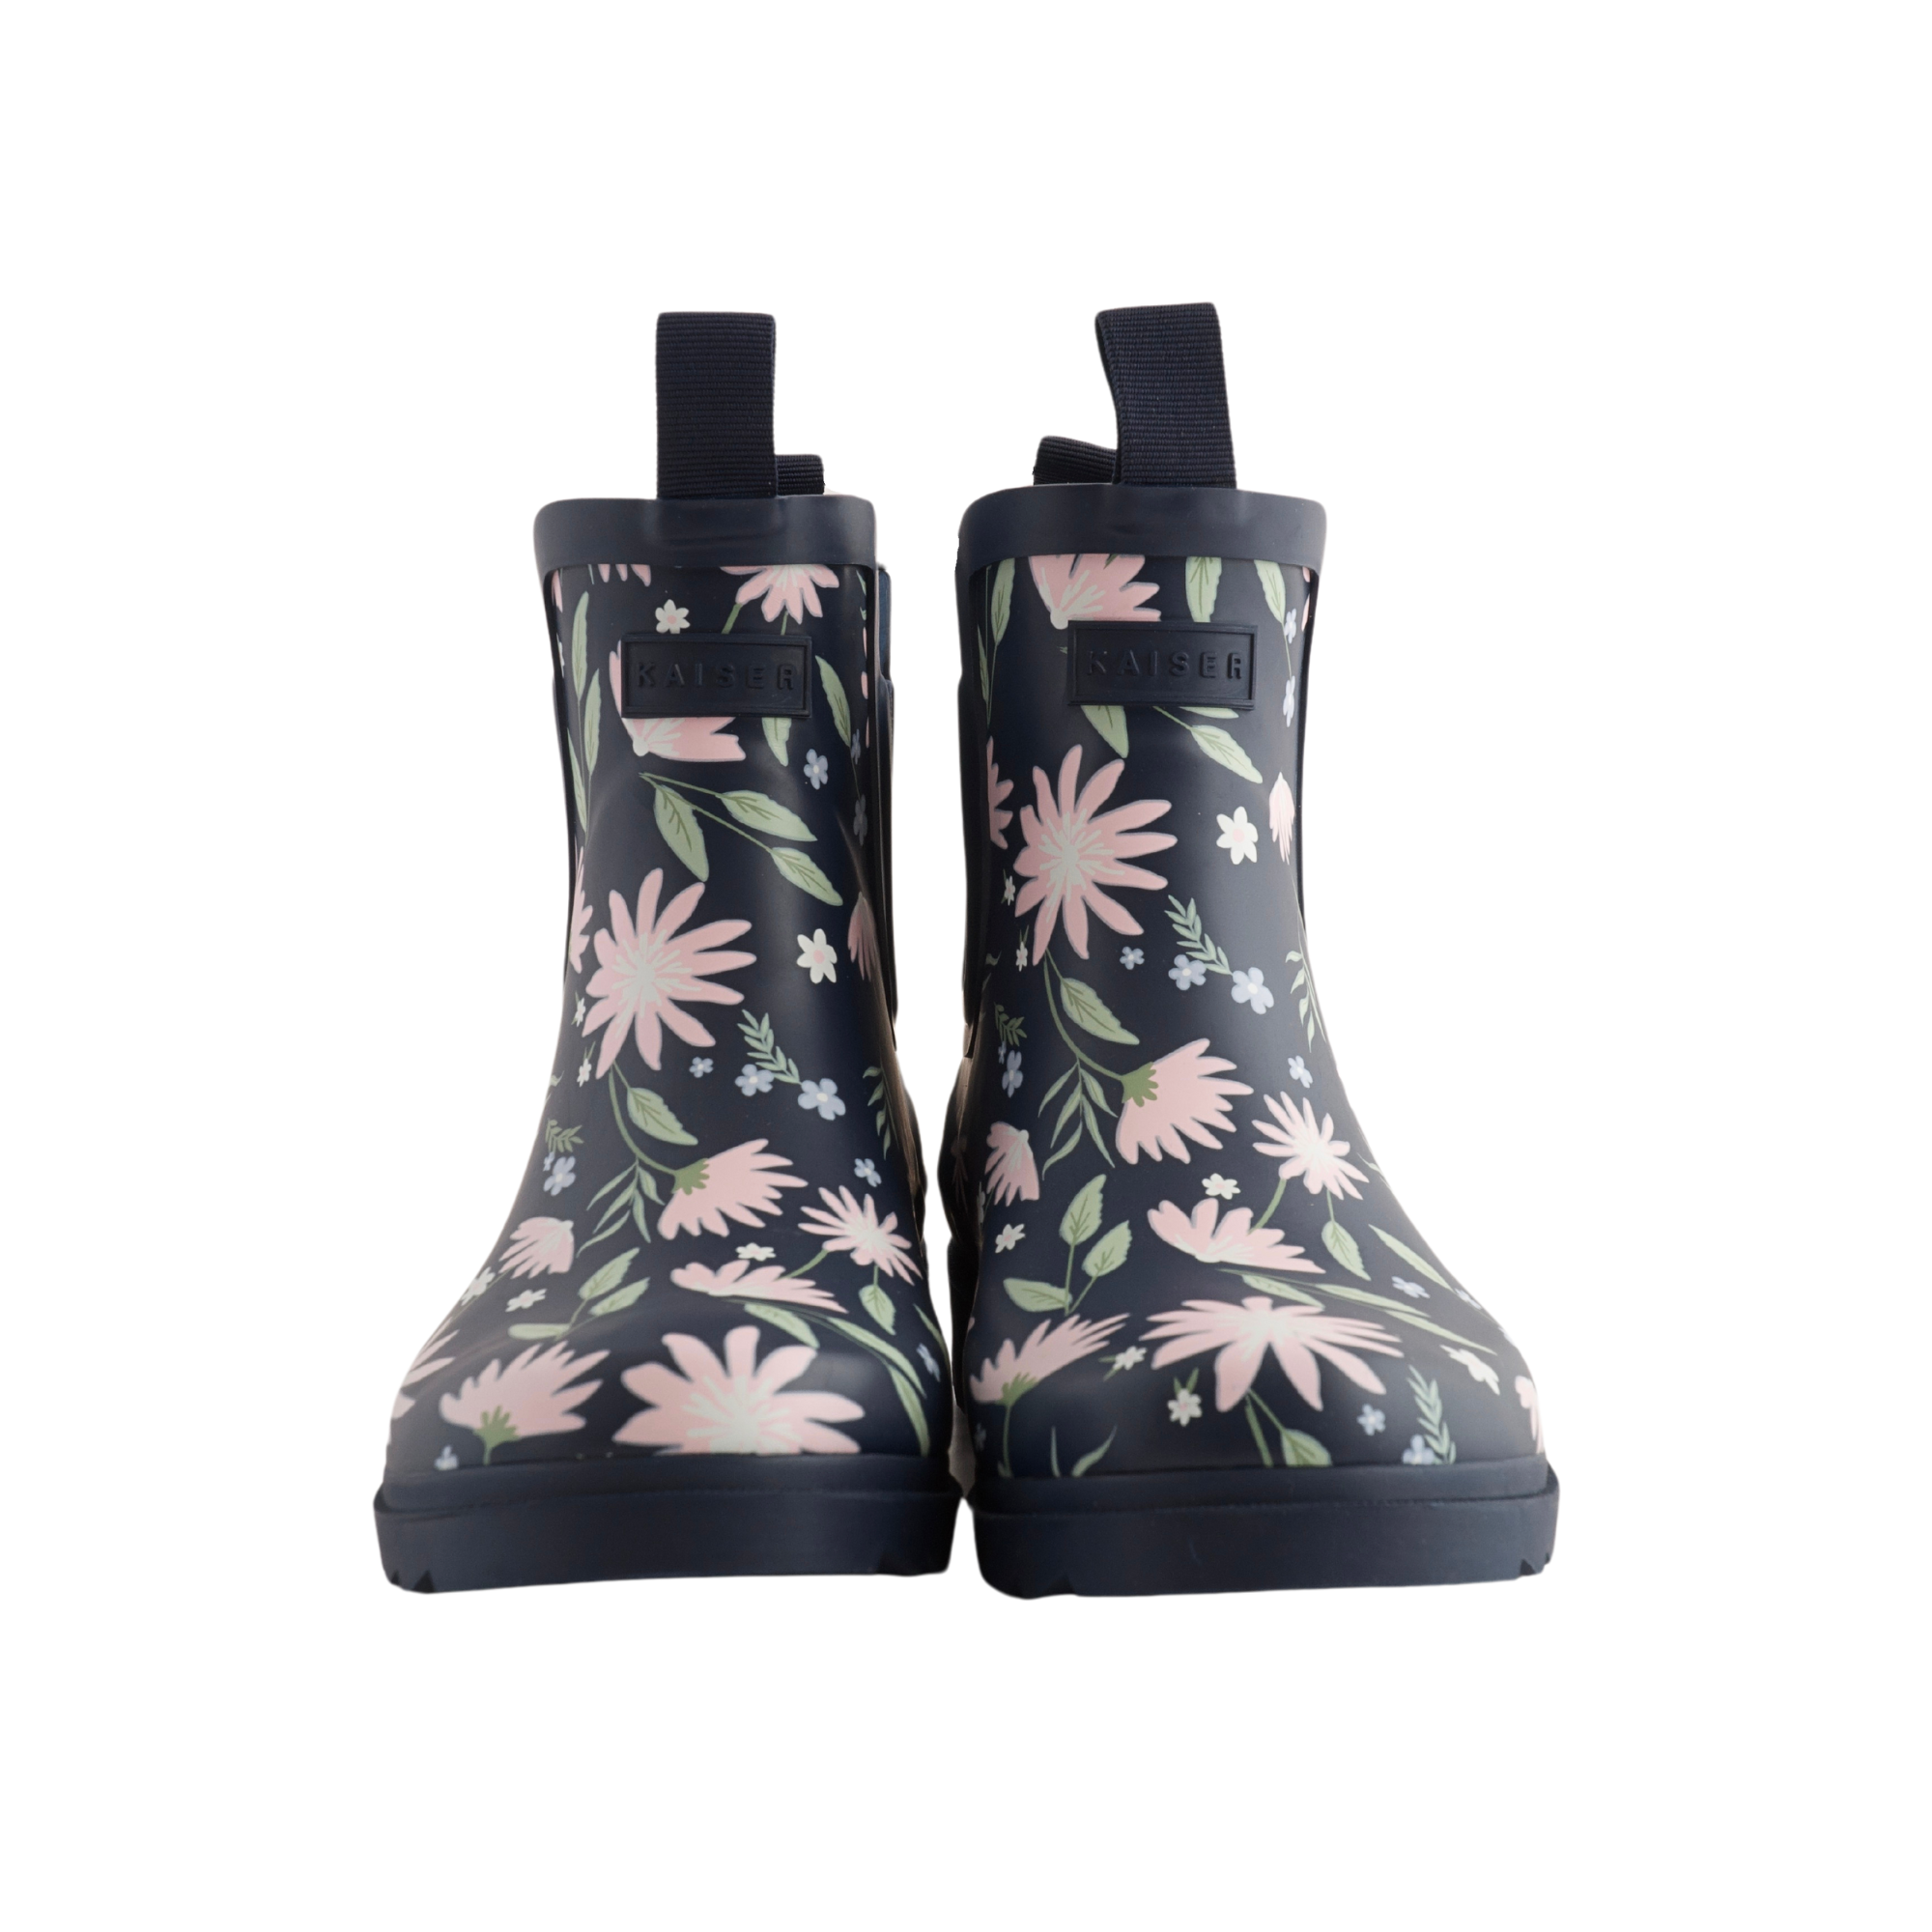 Ankle Gumboots - Navy Floral Size 9